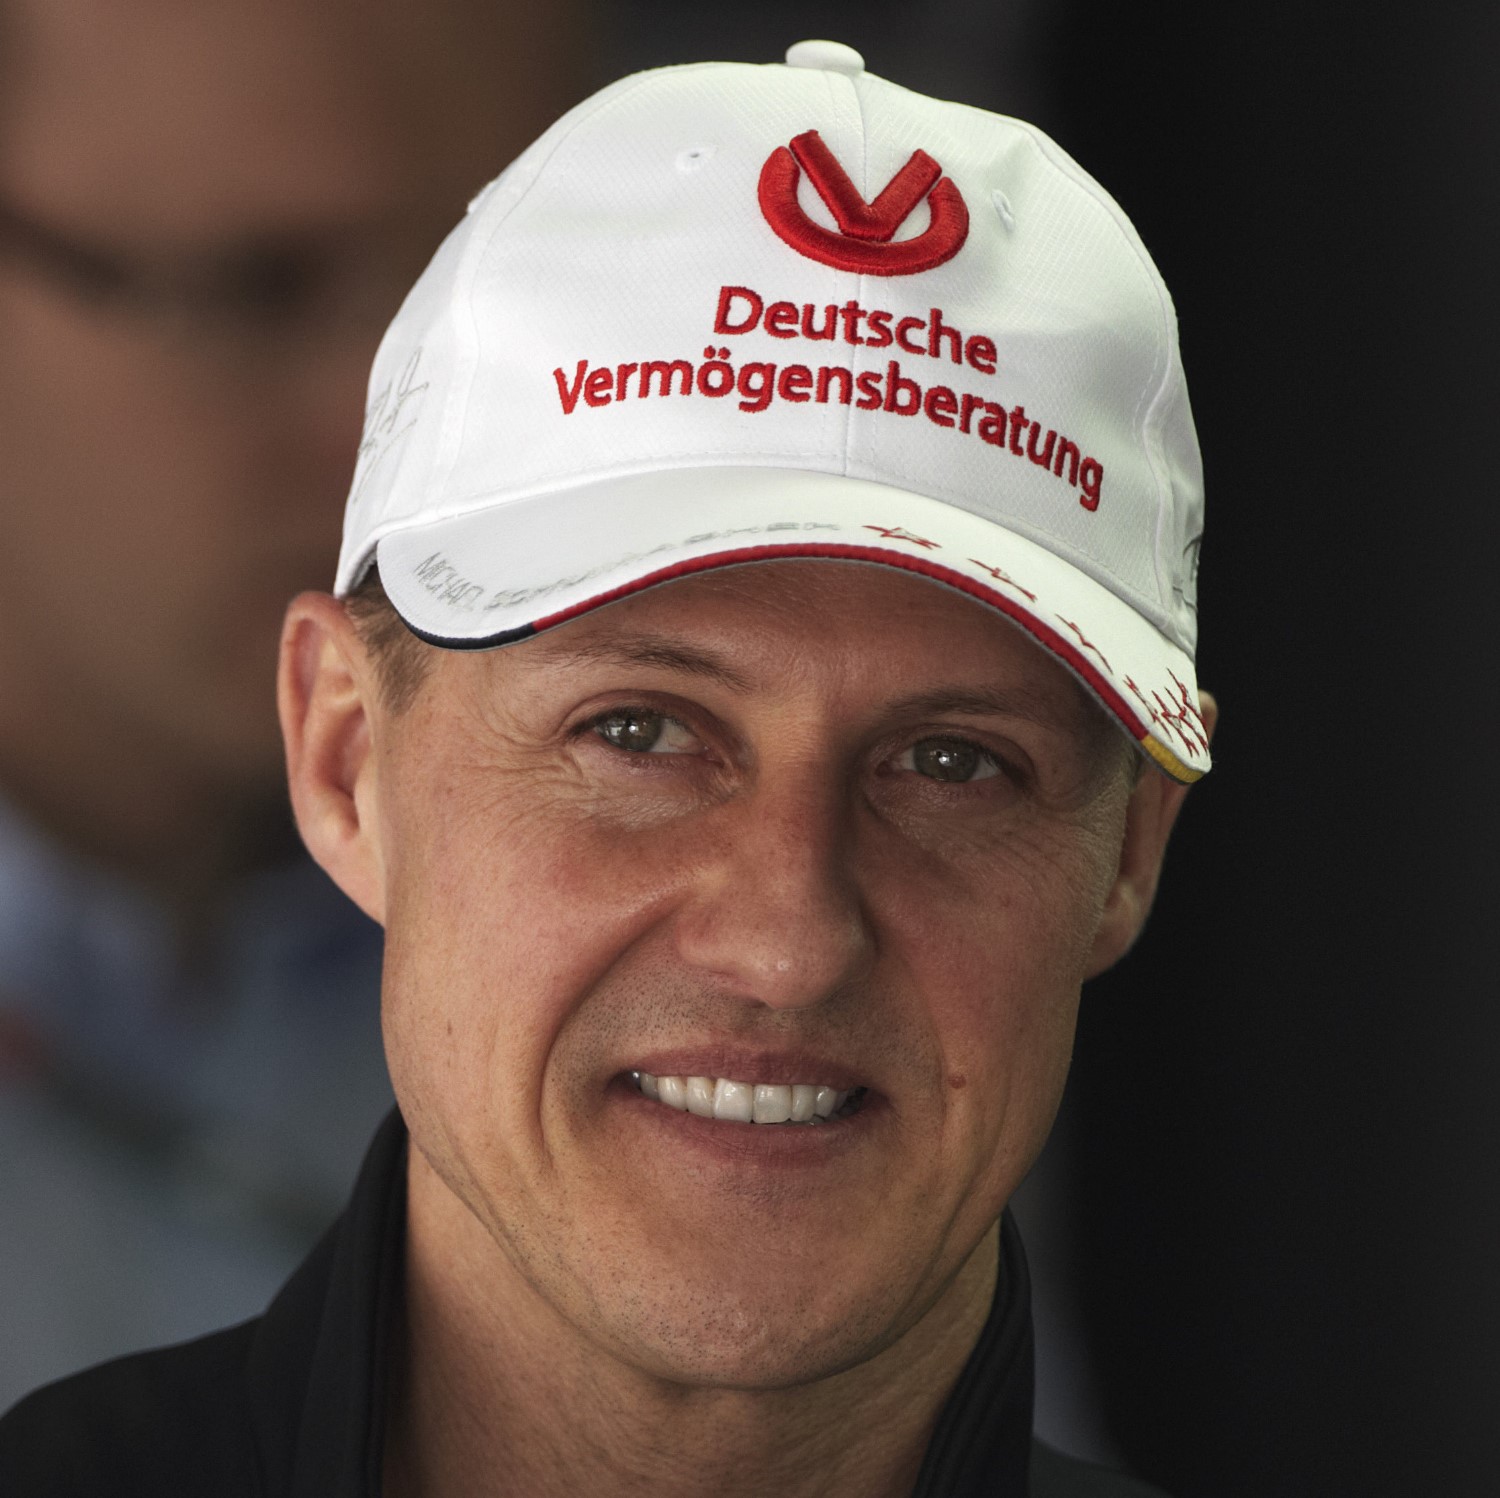 Schumacher is a complete mystery to everyone - and is likely in a vegetative state